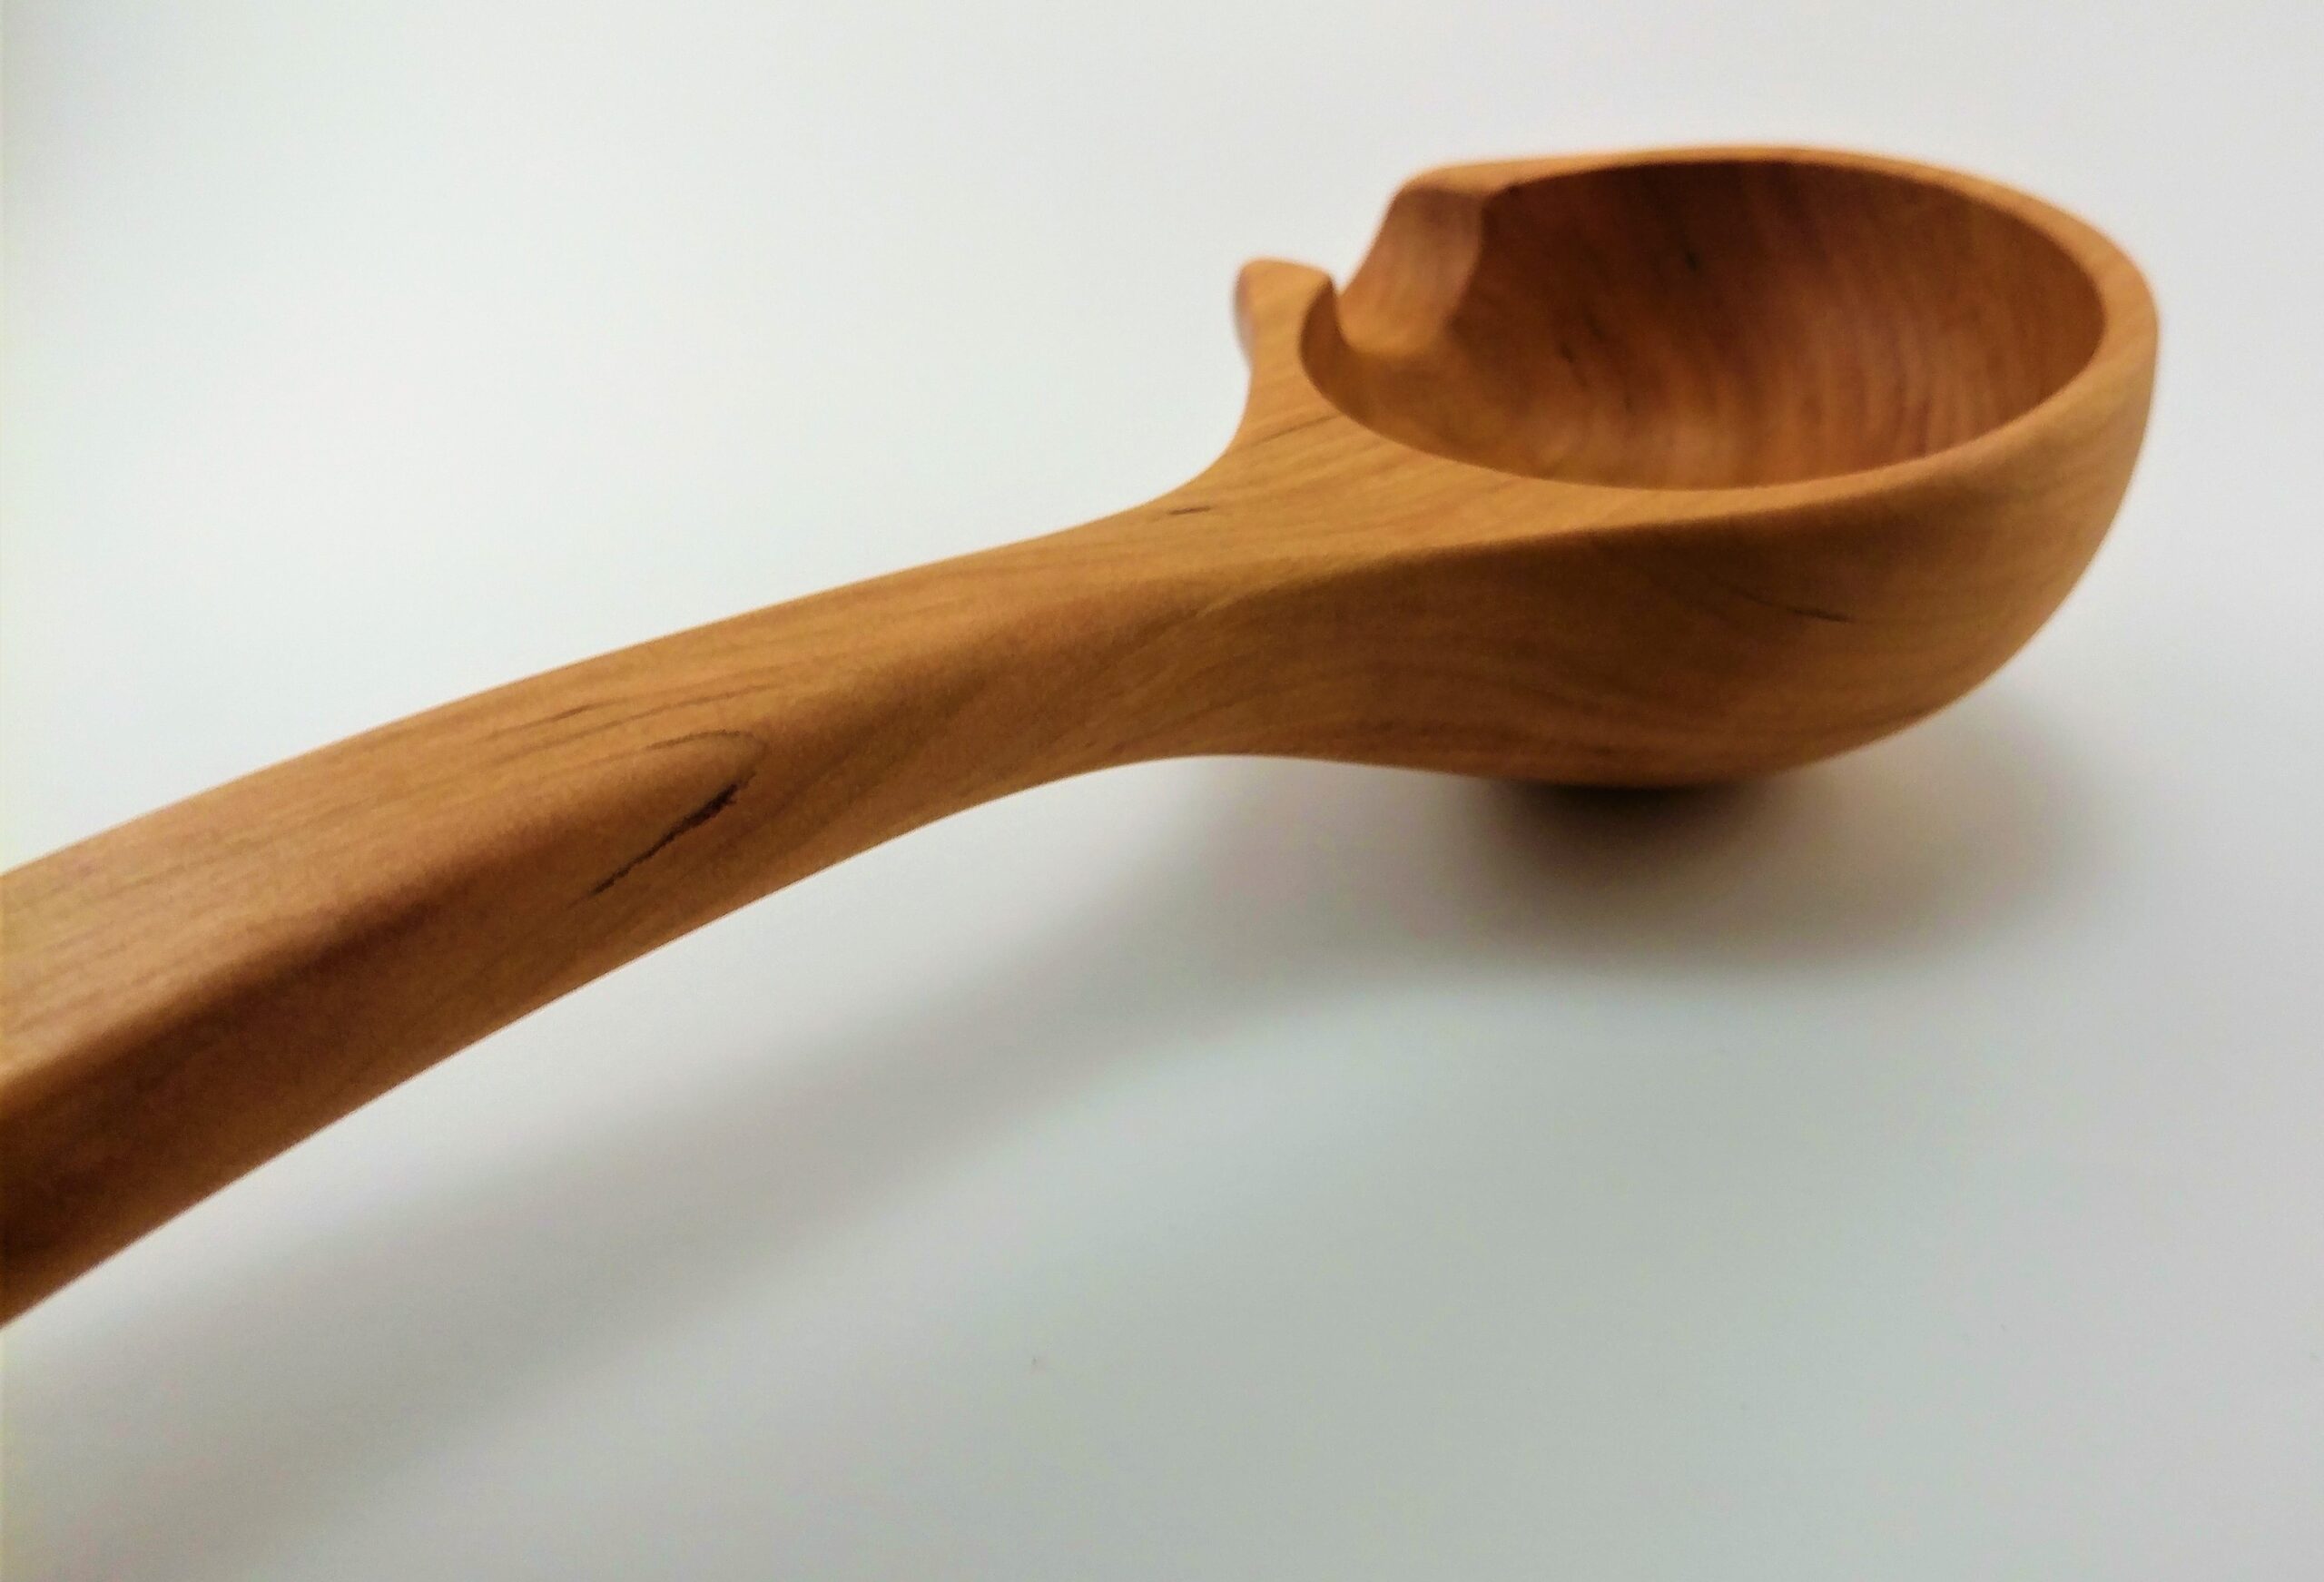 https://alleghenytreenware.com/wp-content/uploads/12-Spouted-Serving-Spoon-4-scaled.jpg